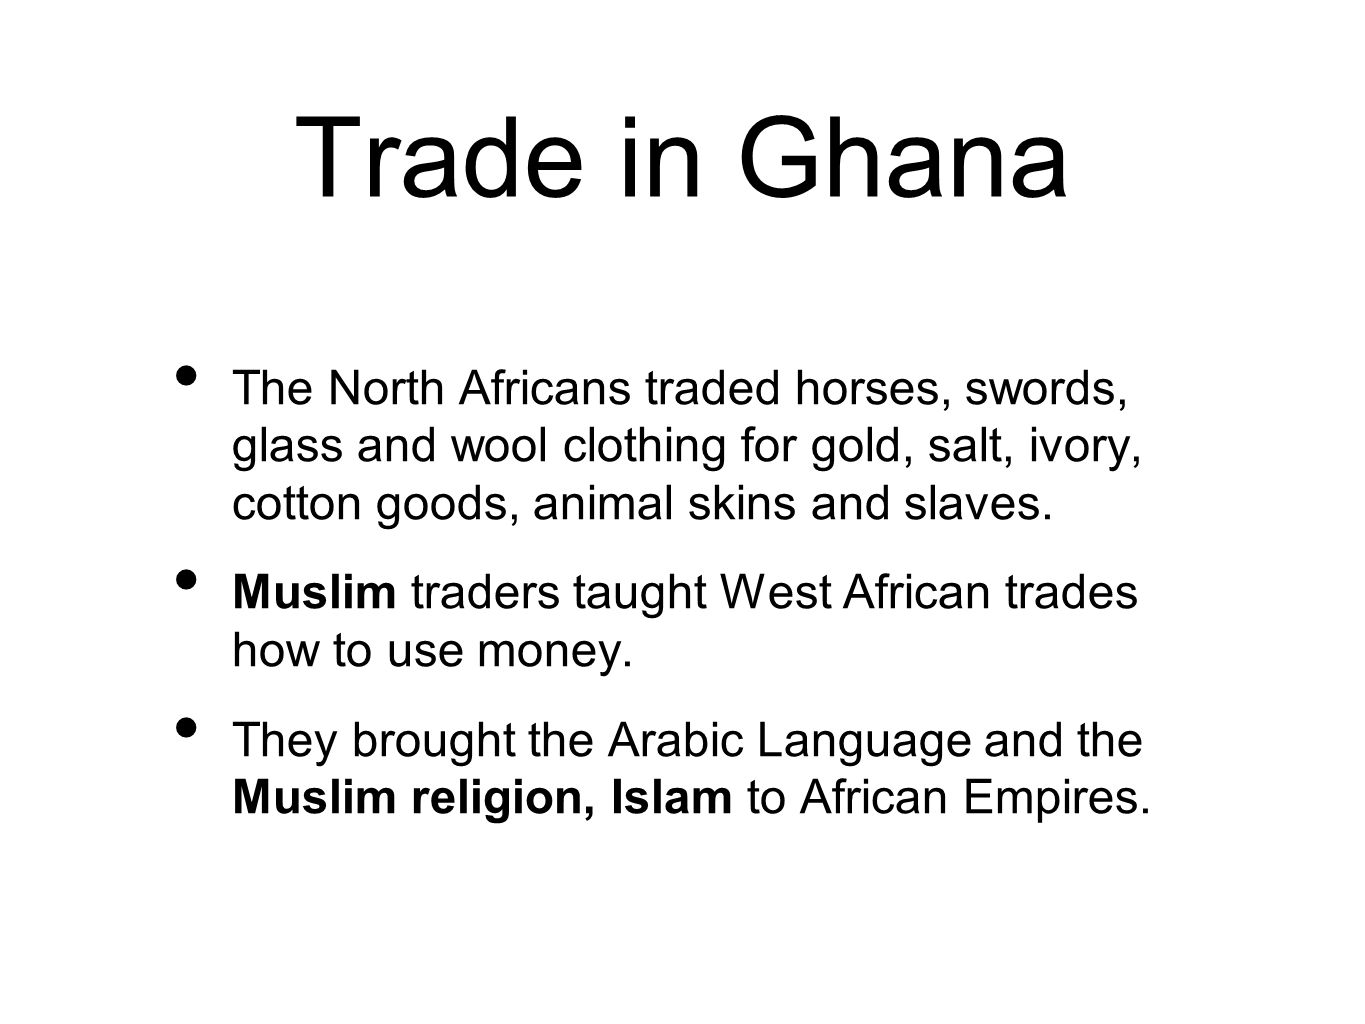 Trade in Ghana The North Africans traded horses, swords, glass and wool clothing for gold, salt, ivory, cotton goods, animal skins and slaves.